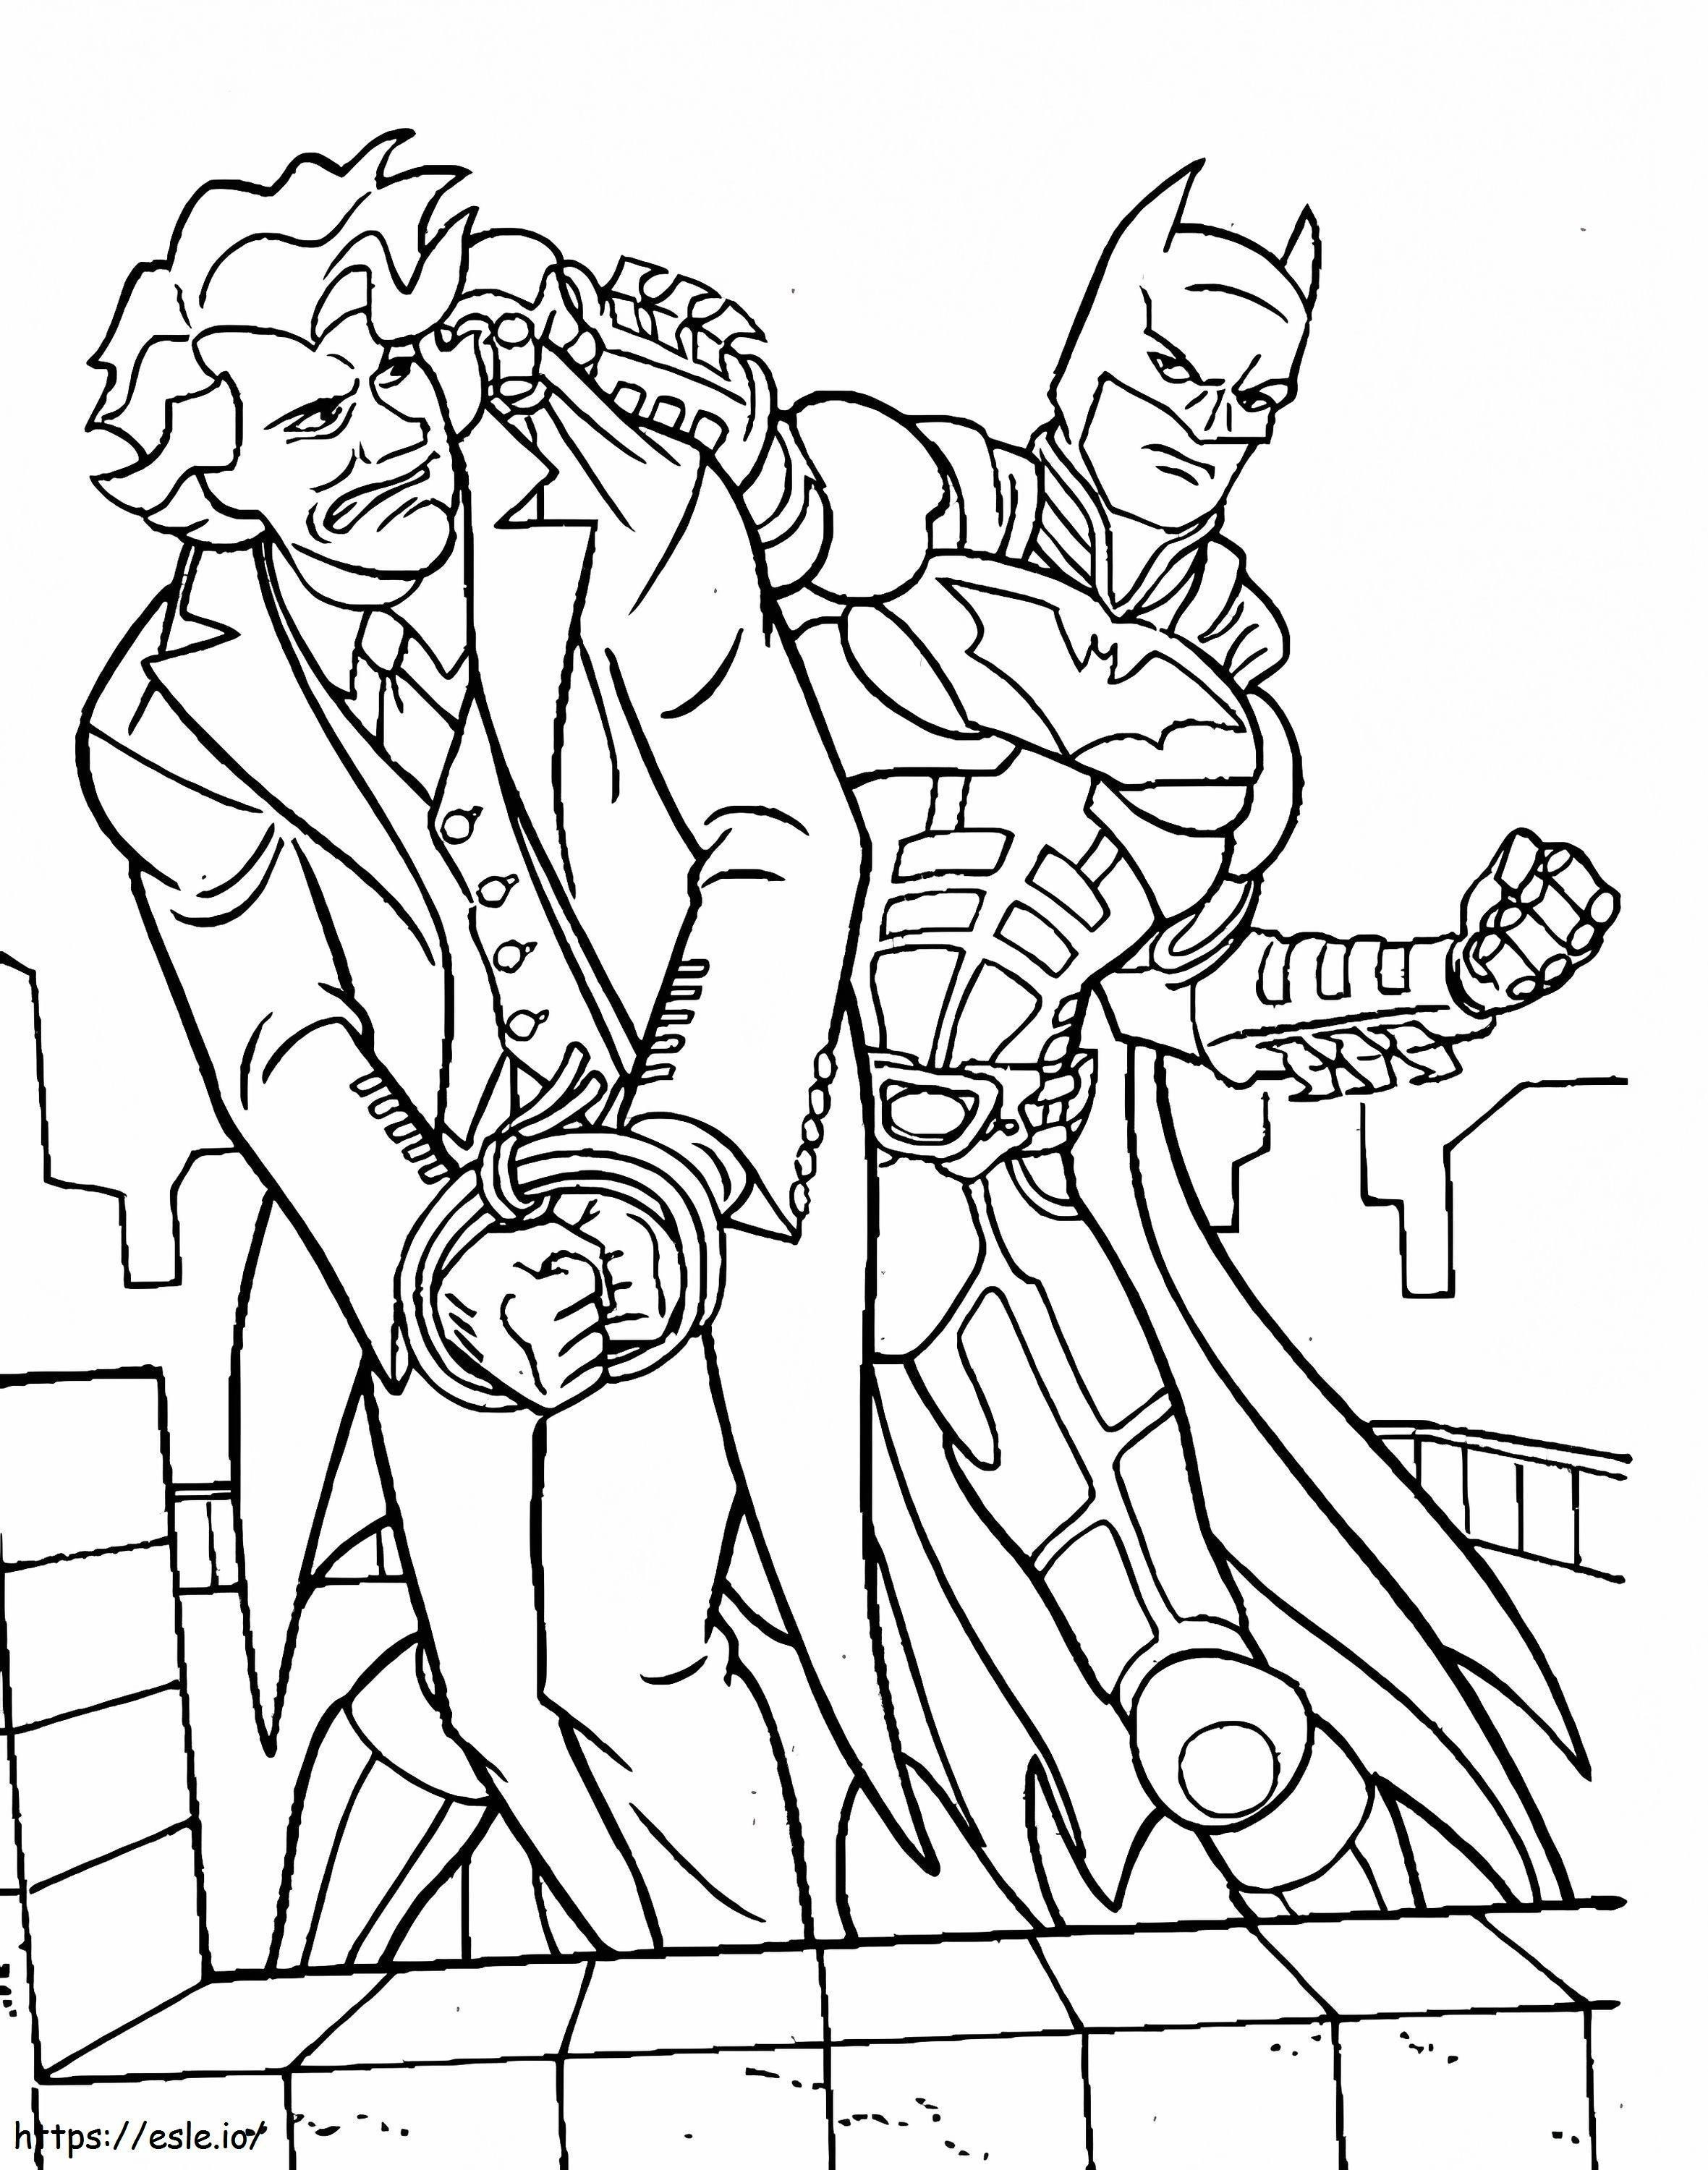 Joker Is Tied Up By Batman coloring page